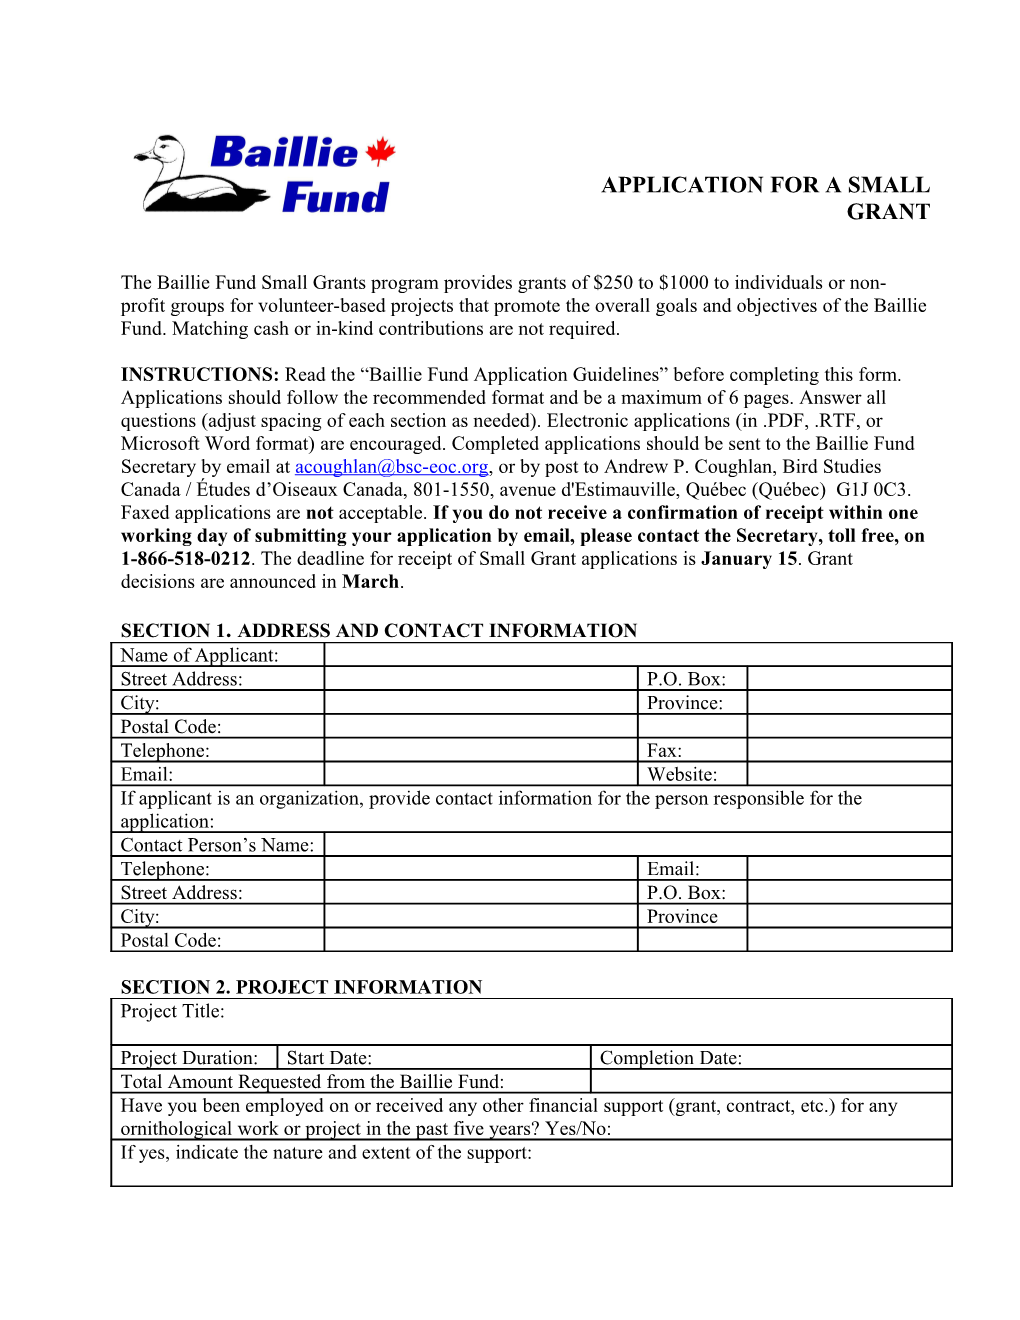 Application for a Small Grant